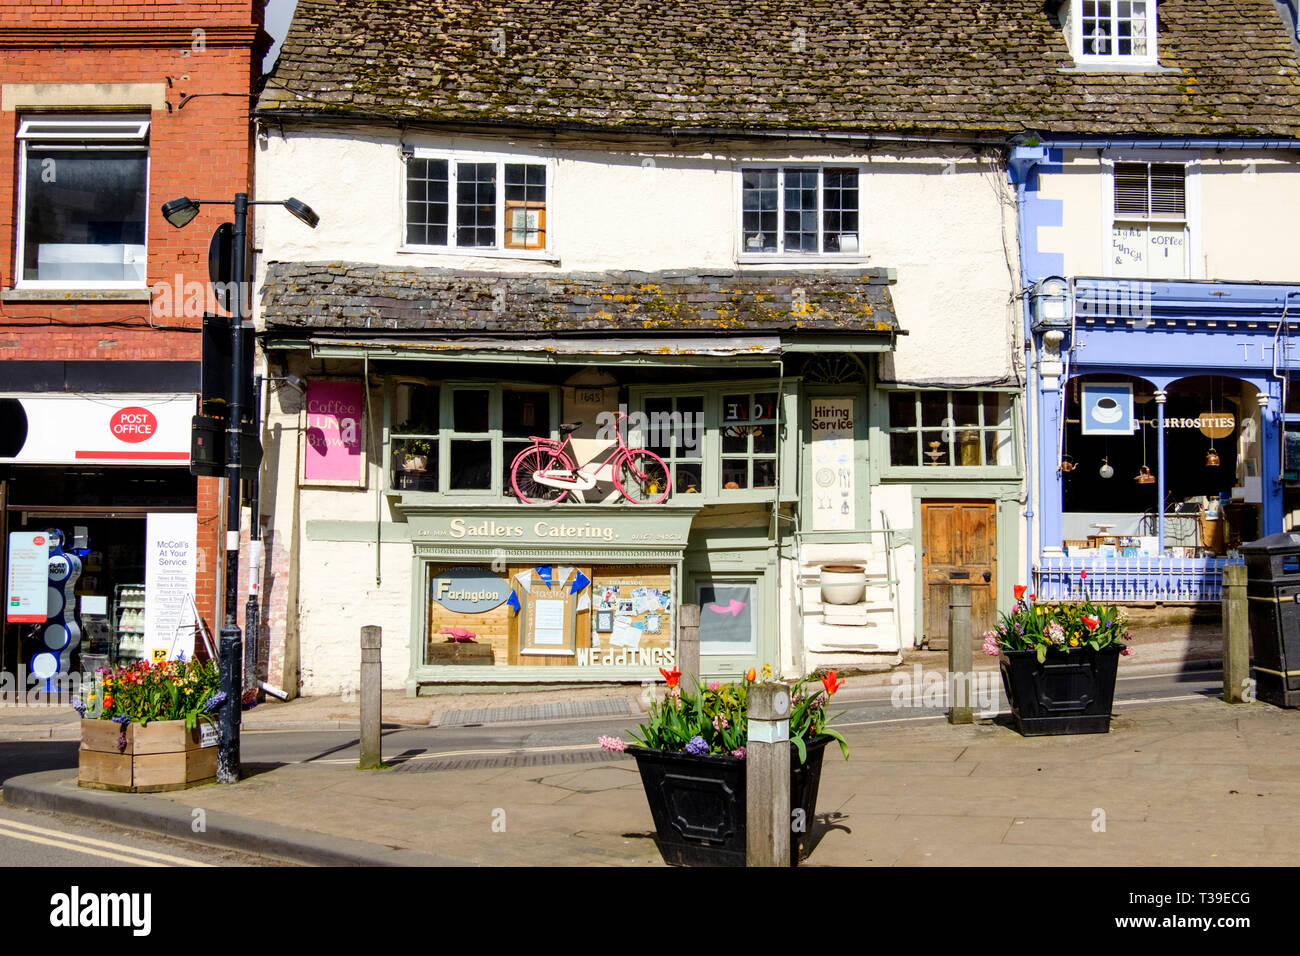 Around Faringdon, a market town in the Vale of the White Horse Oxfordshire UK  Sadlers Catering Stock Photo